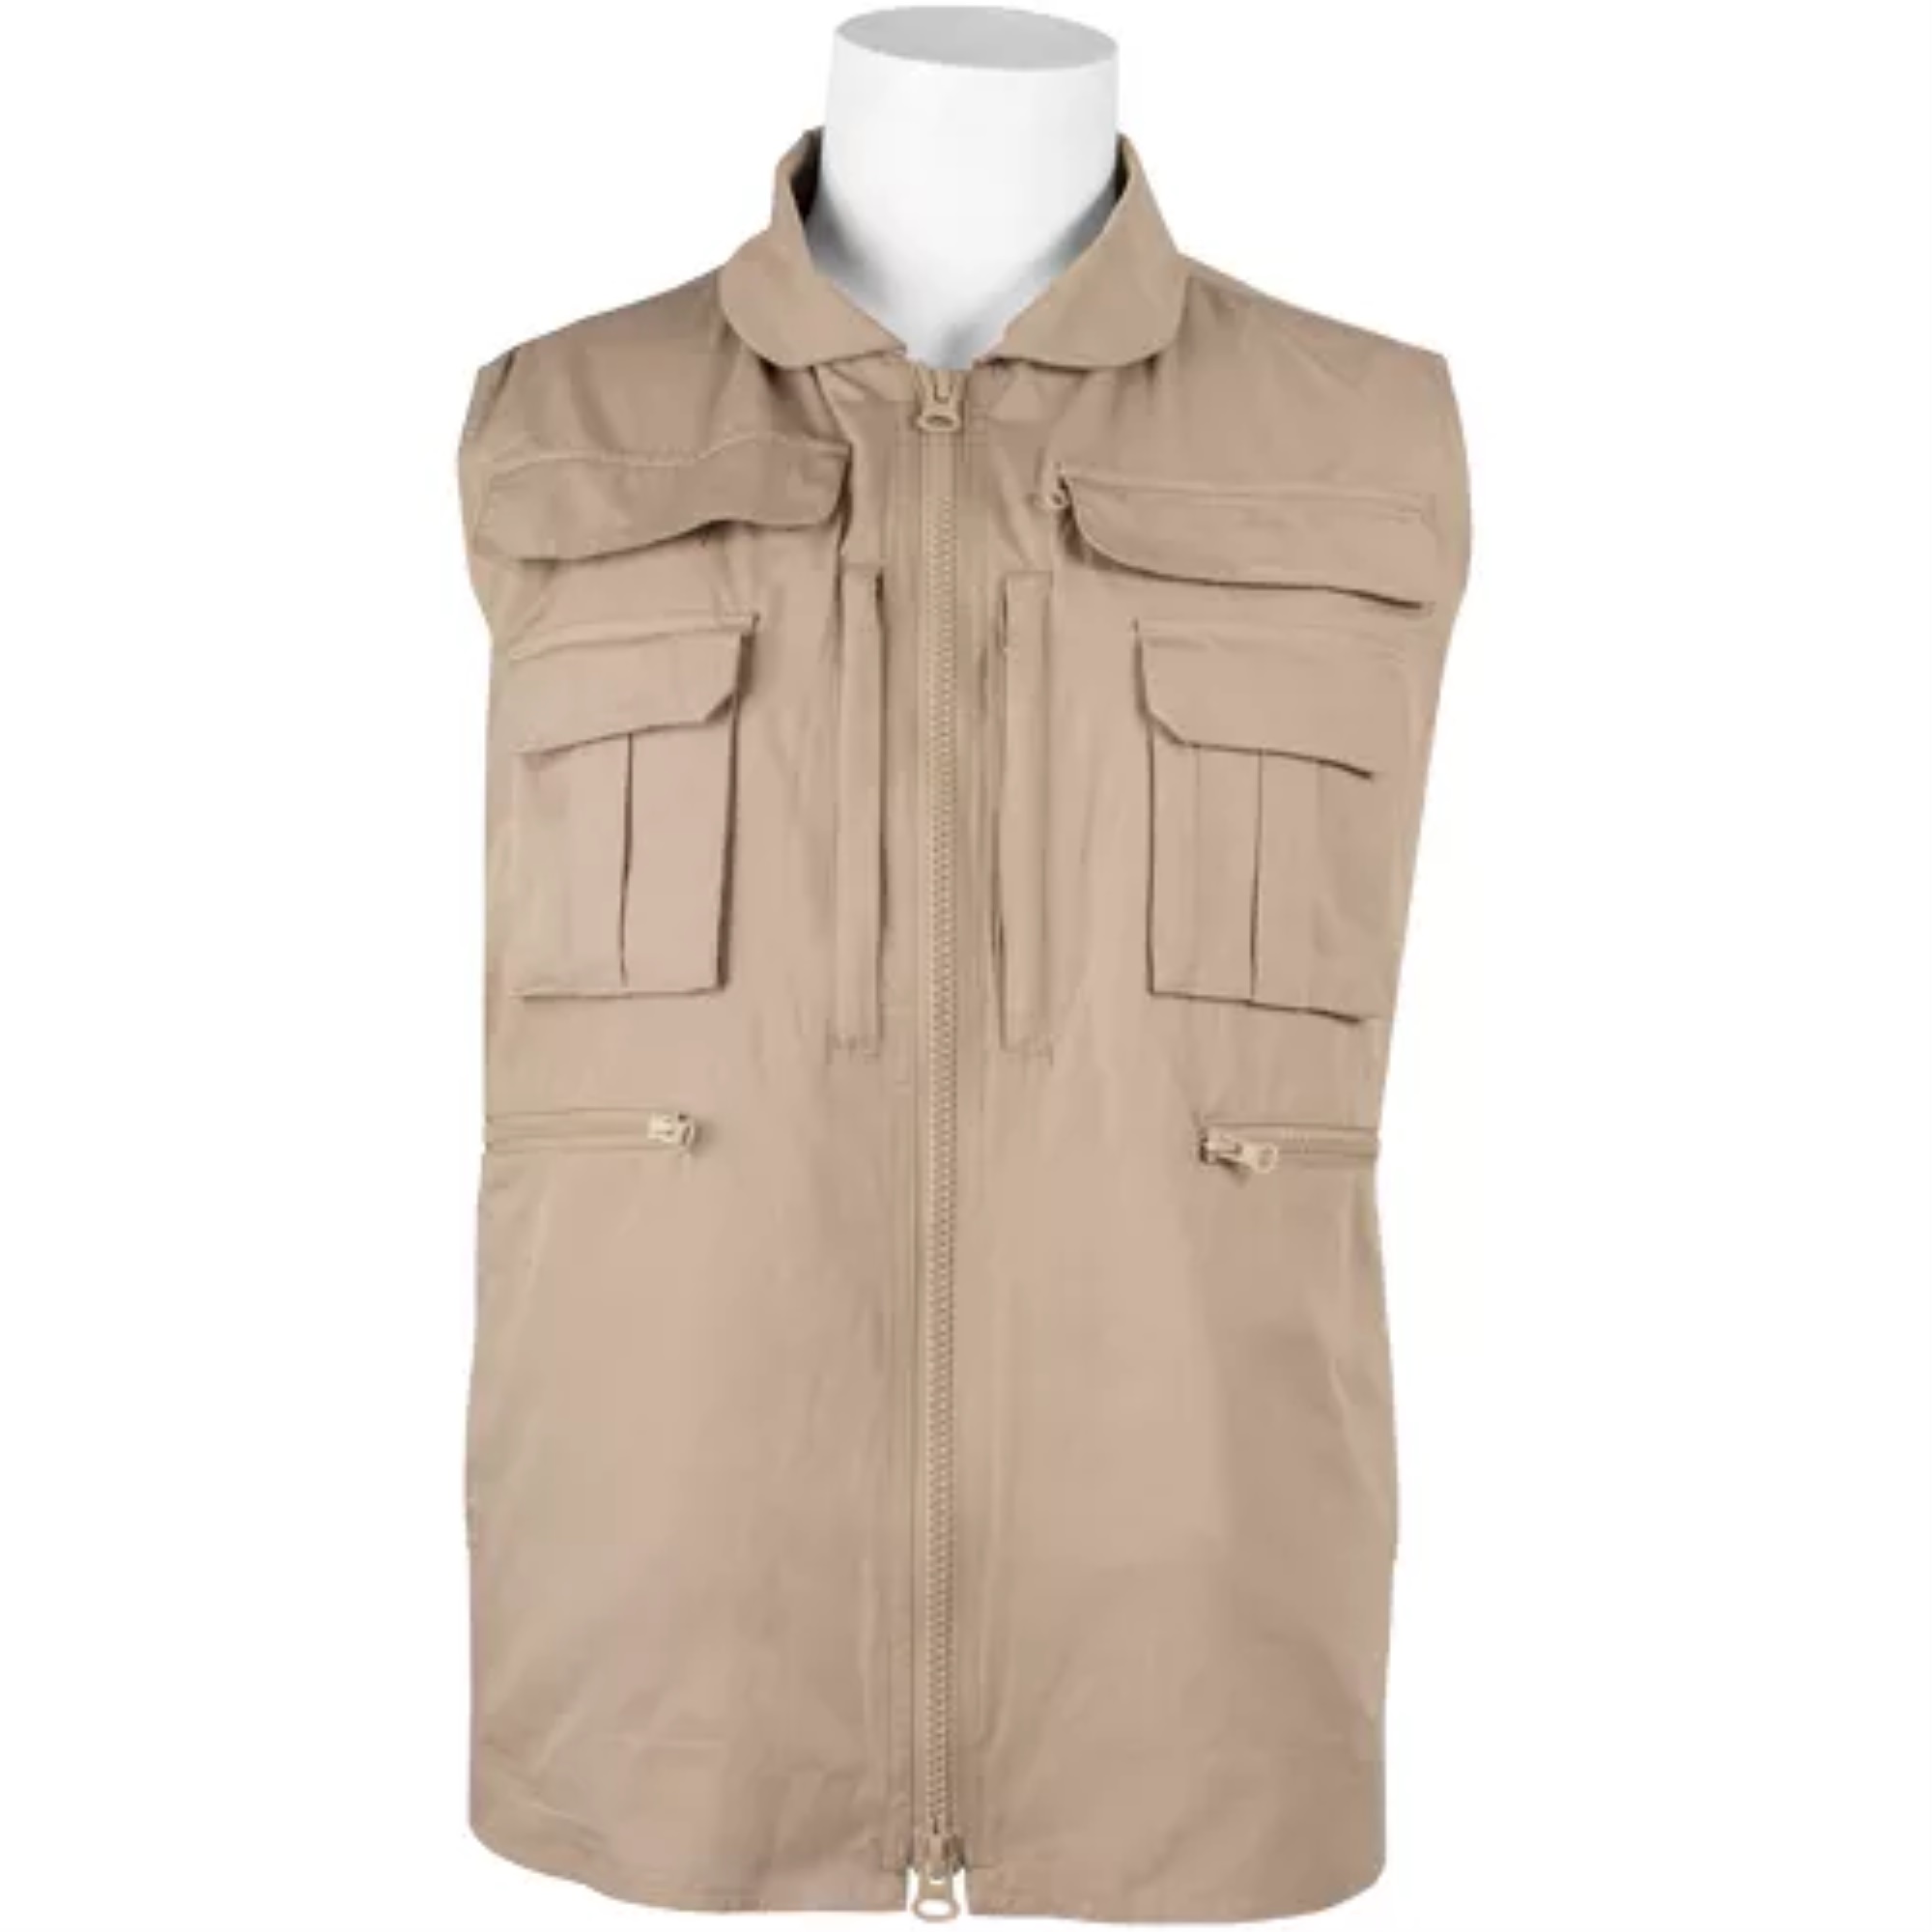 Fox Outdoor Products Viper Concealed Carry Vest Khaki - Large